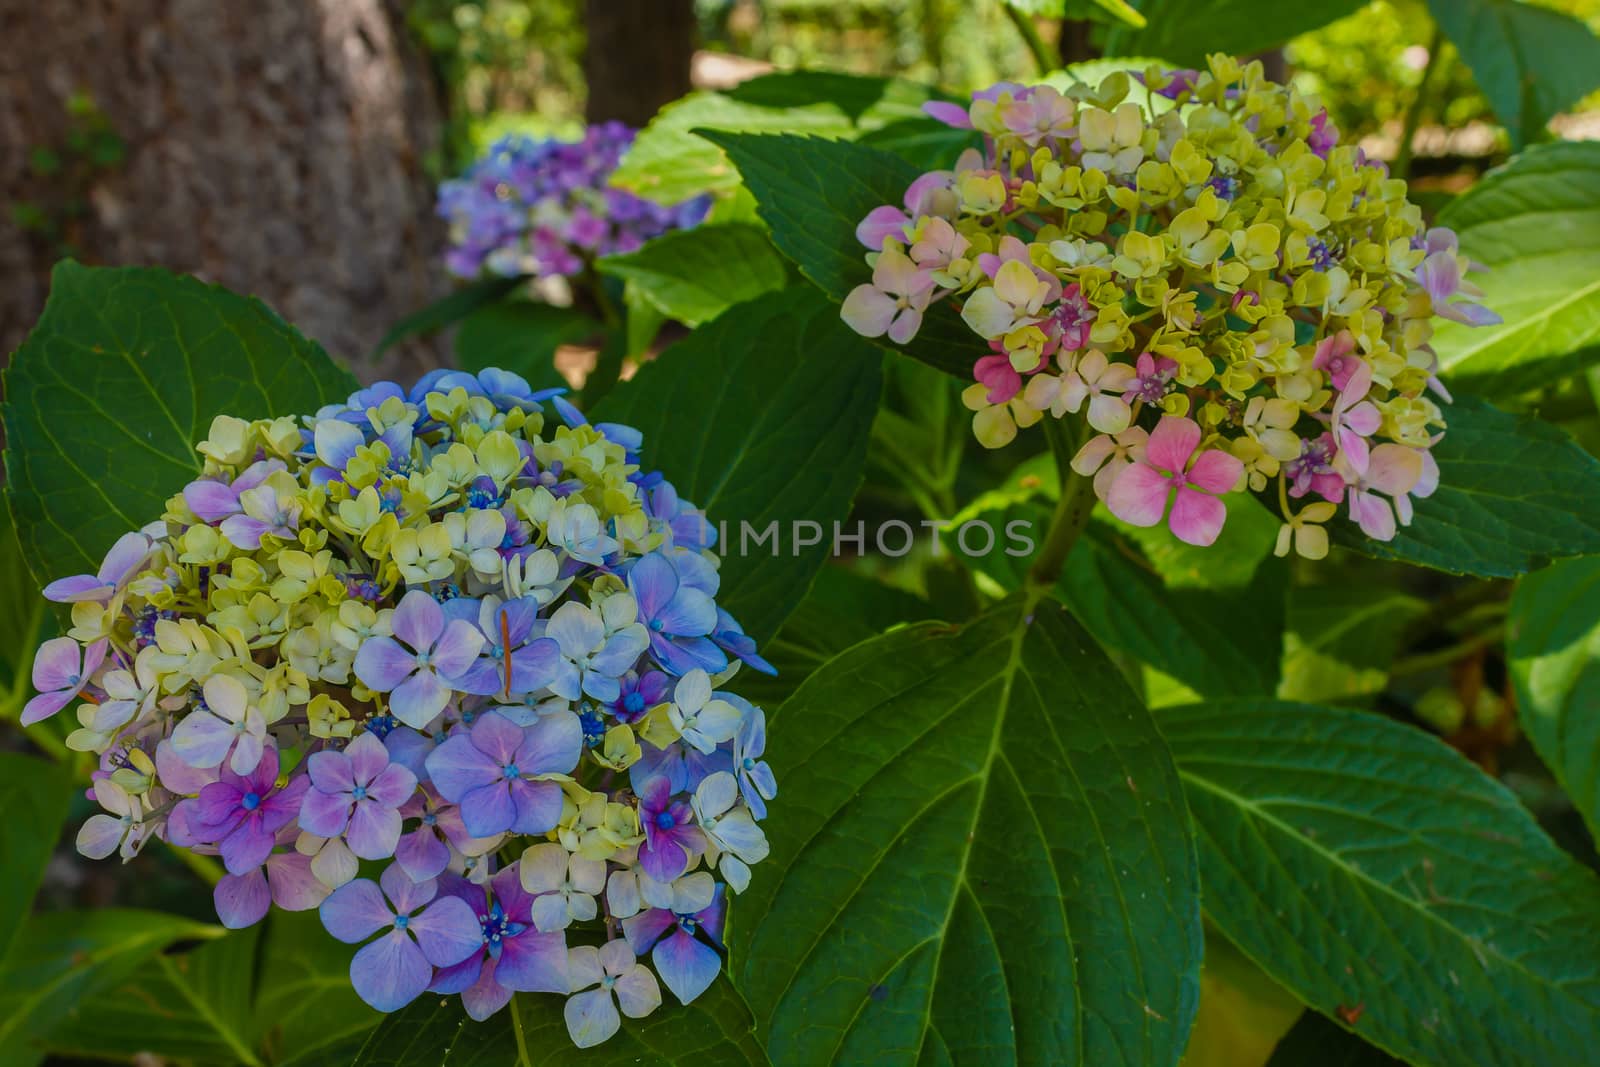 hydrangea is a decorative plant that blooms in summer and produces large inflorescences of bright colors. The hydrangeas are quite unique plants thanks to their ability to change color depending on the pH level of the soil. Blue, purple and white hydrangeas grow in acidic soil, with pH between 4.5 and 5, while pink and red hydrangeas grow in alkaline soil with pH 6 and 6.5